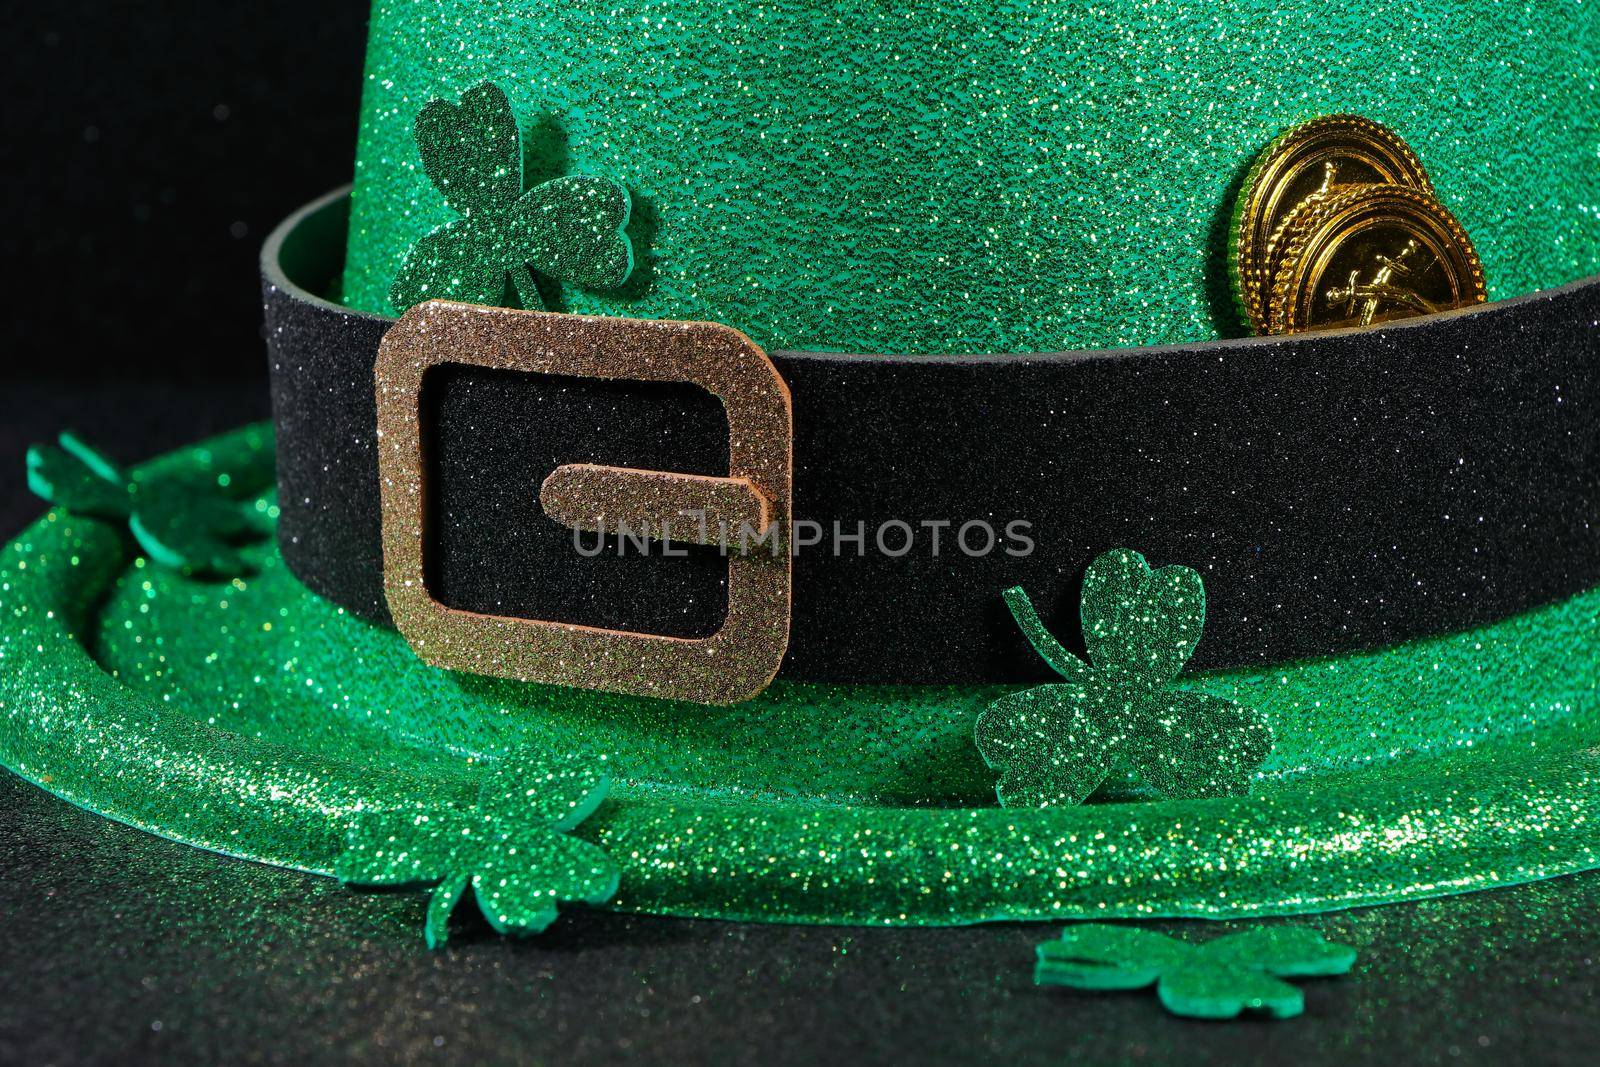 Leprechaun Party Hat With Shamrocks And Gold Coins by jjvanginkel